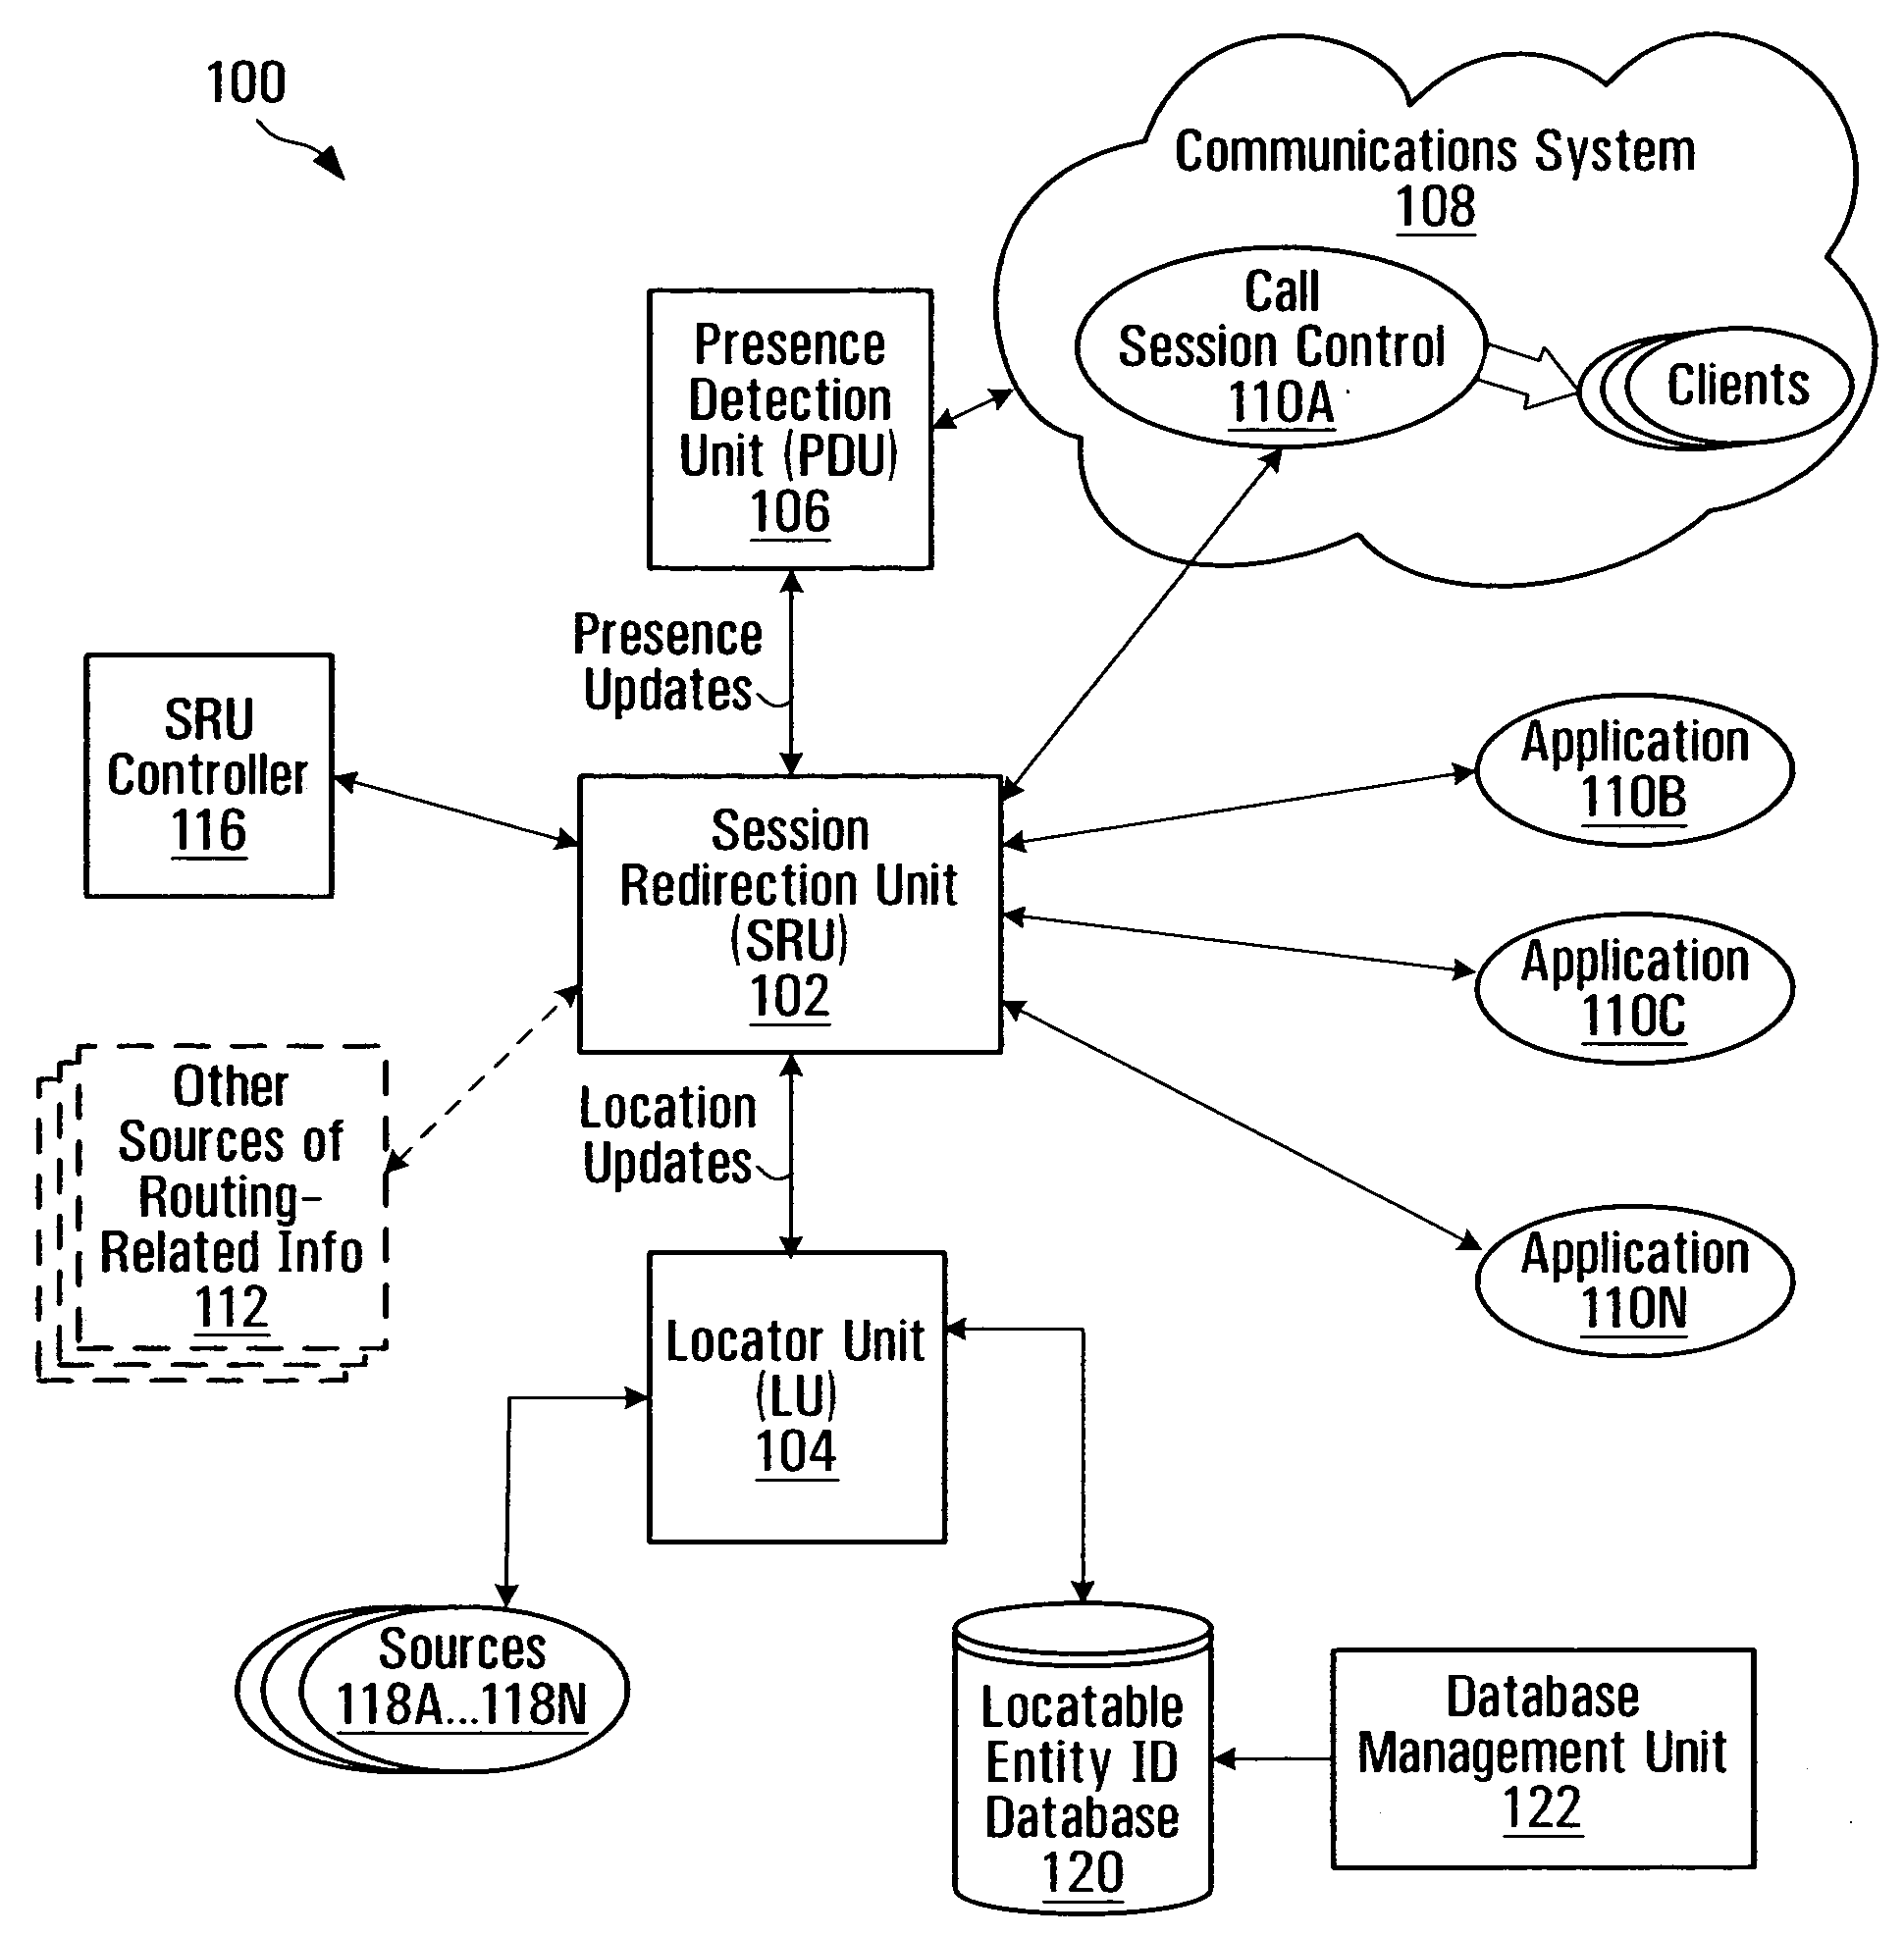 Method and device for determining location-enhanced presence information for entities subscribed to a communications system